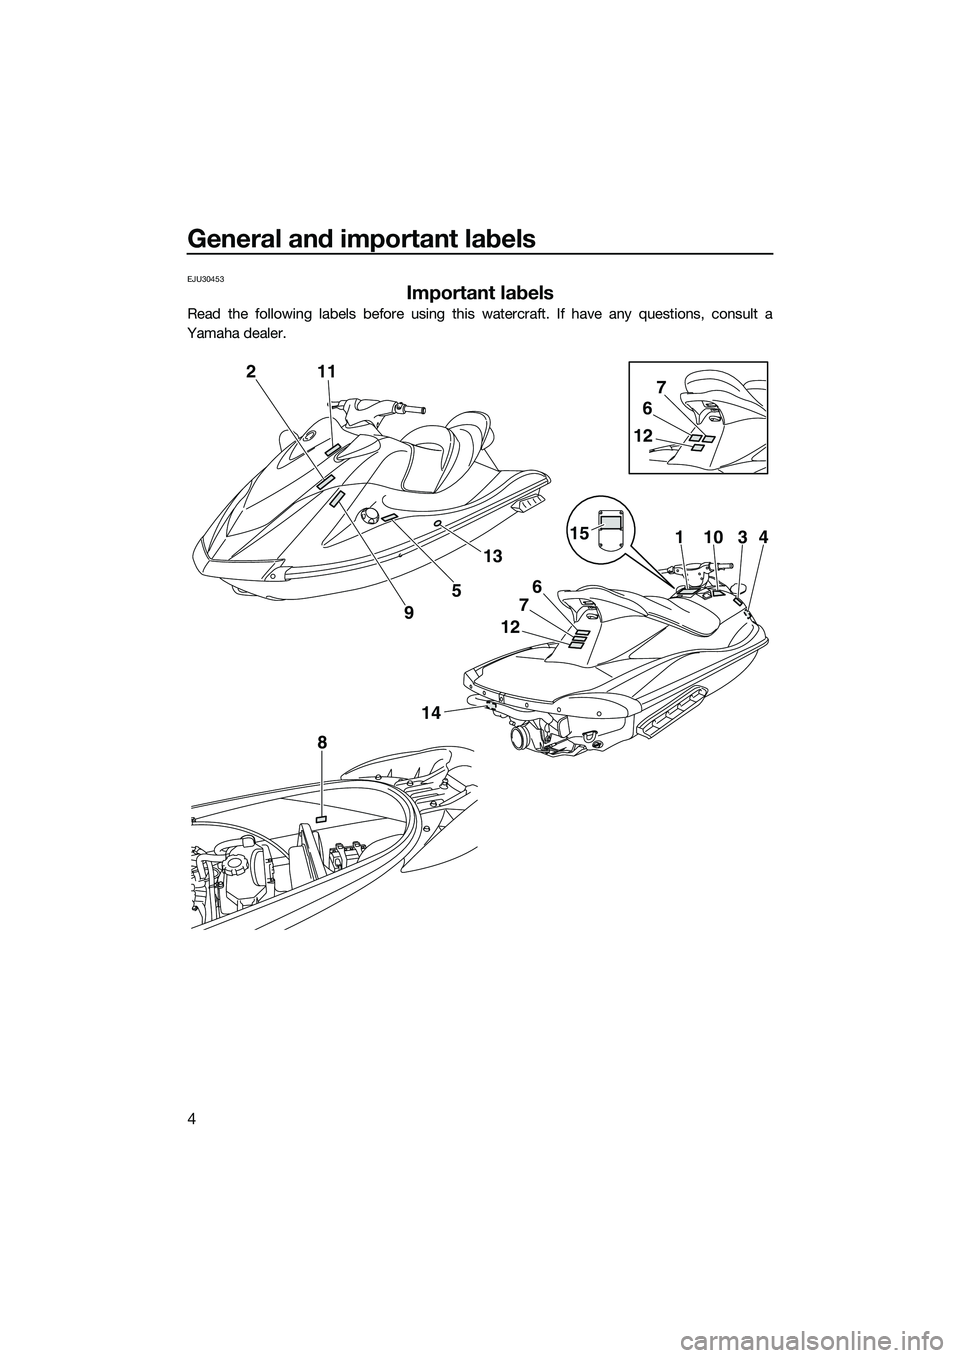 YAMAHA VX DELUXE 2014  Owners Manual General and important labels
4
EJU30453
Important labels
Read the following labels before using this watercraft. If have any questions, consult a
Yamaha dealer.
2
14
8
12
6
7
15
6
7
12
11034
11
9
5
13